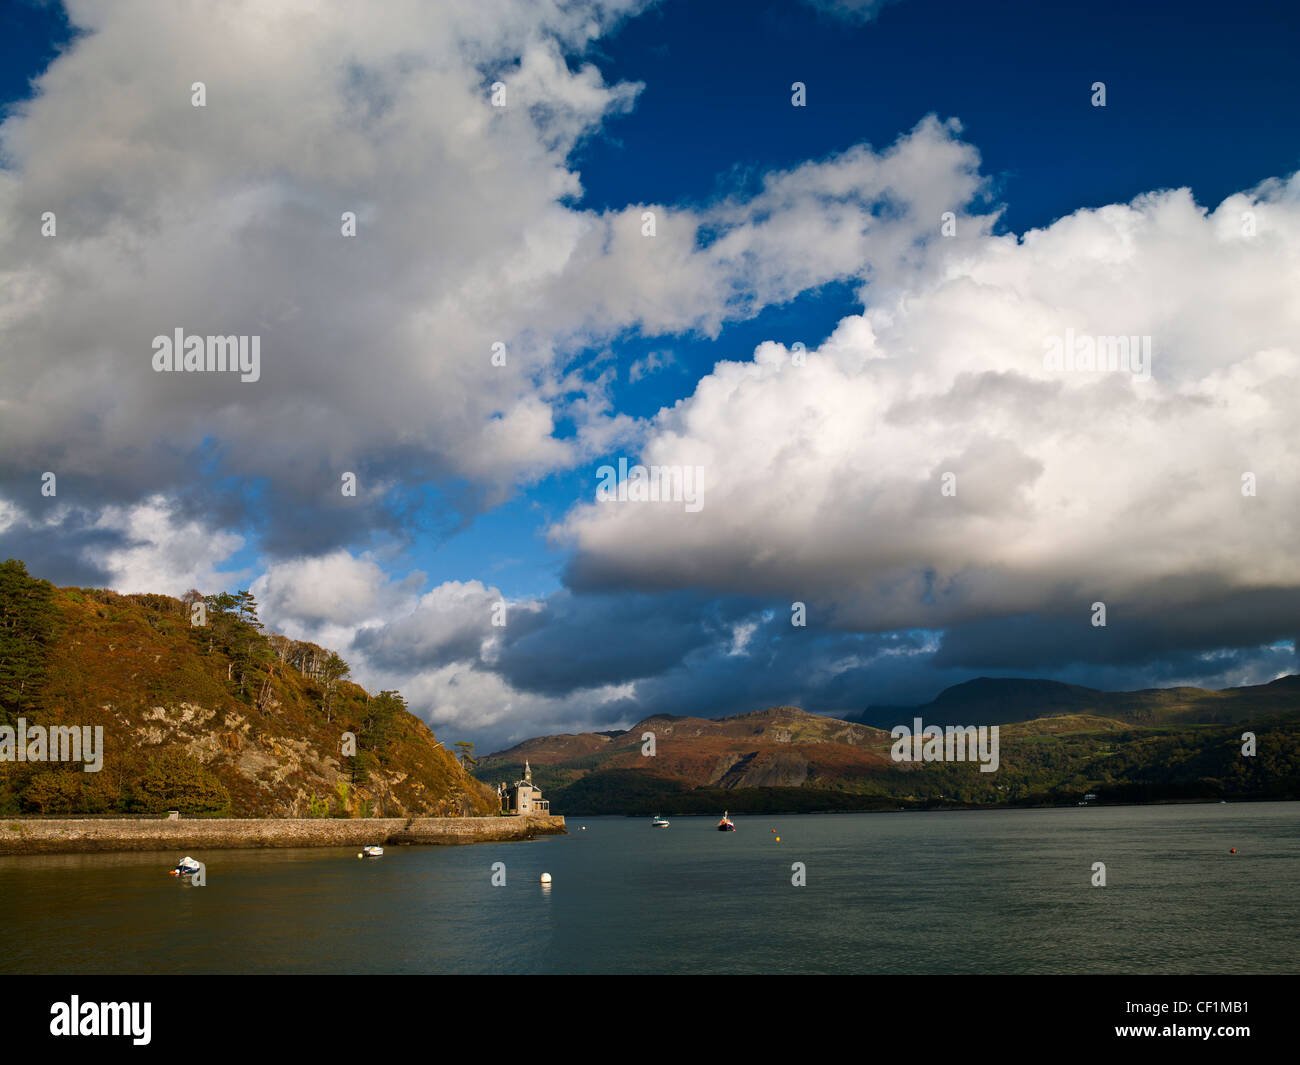 Boats moored on the Mawddach Estuary by the Old Customs House. Stock Photo